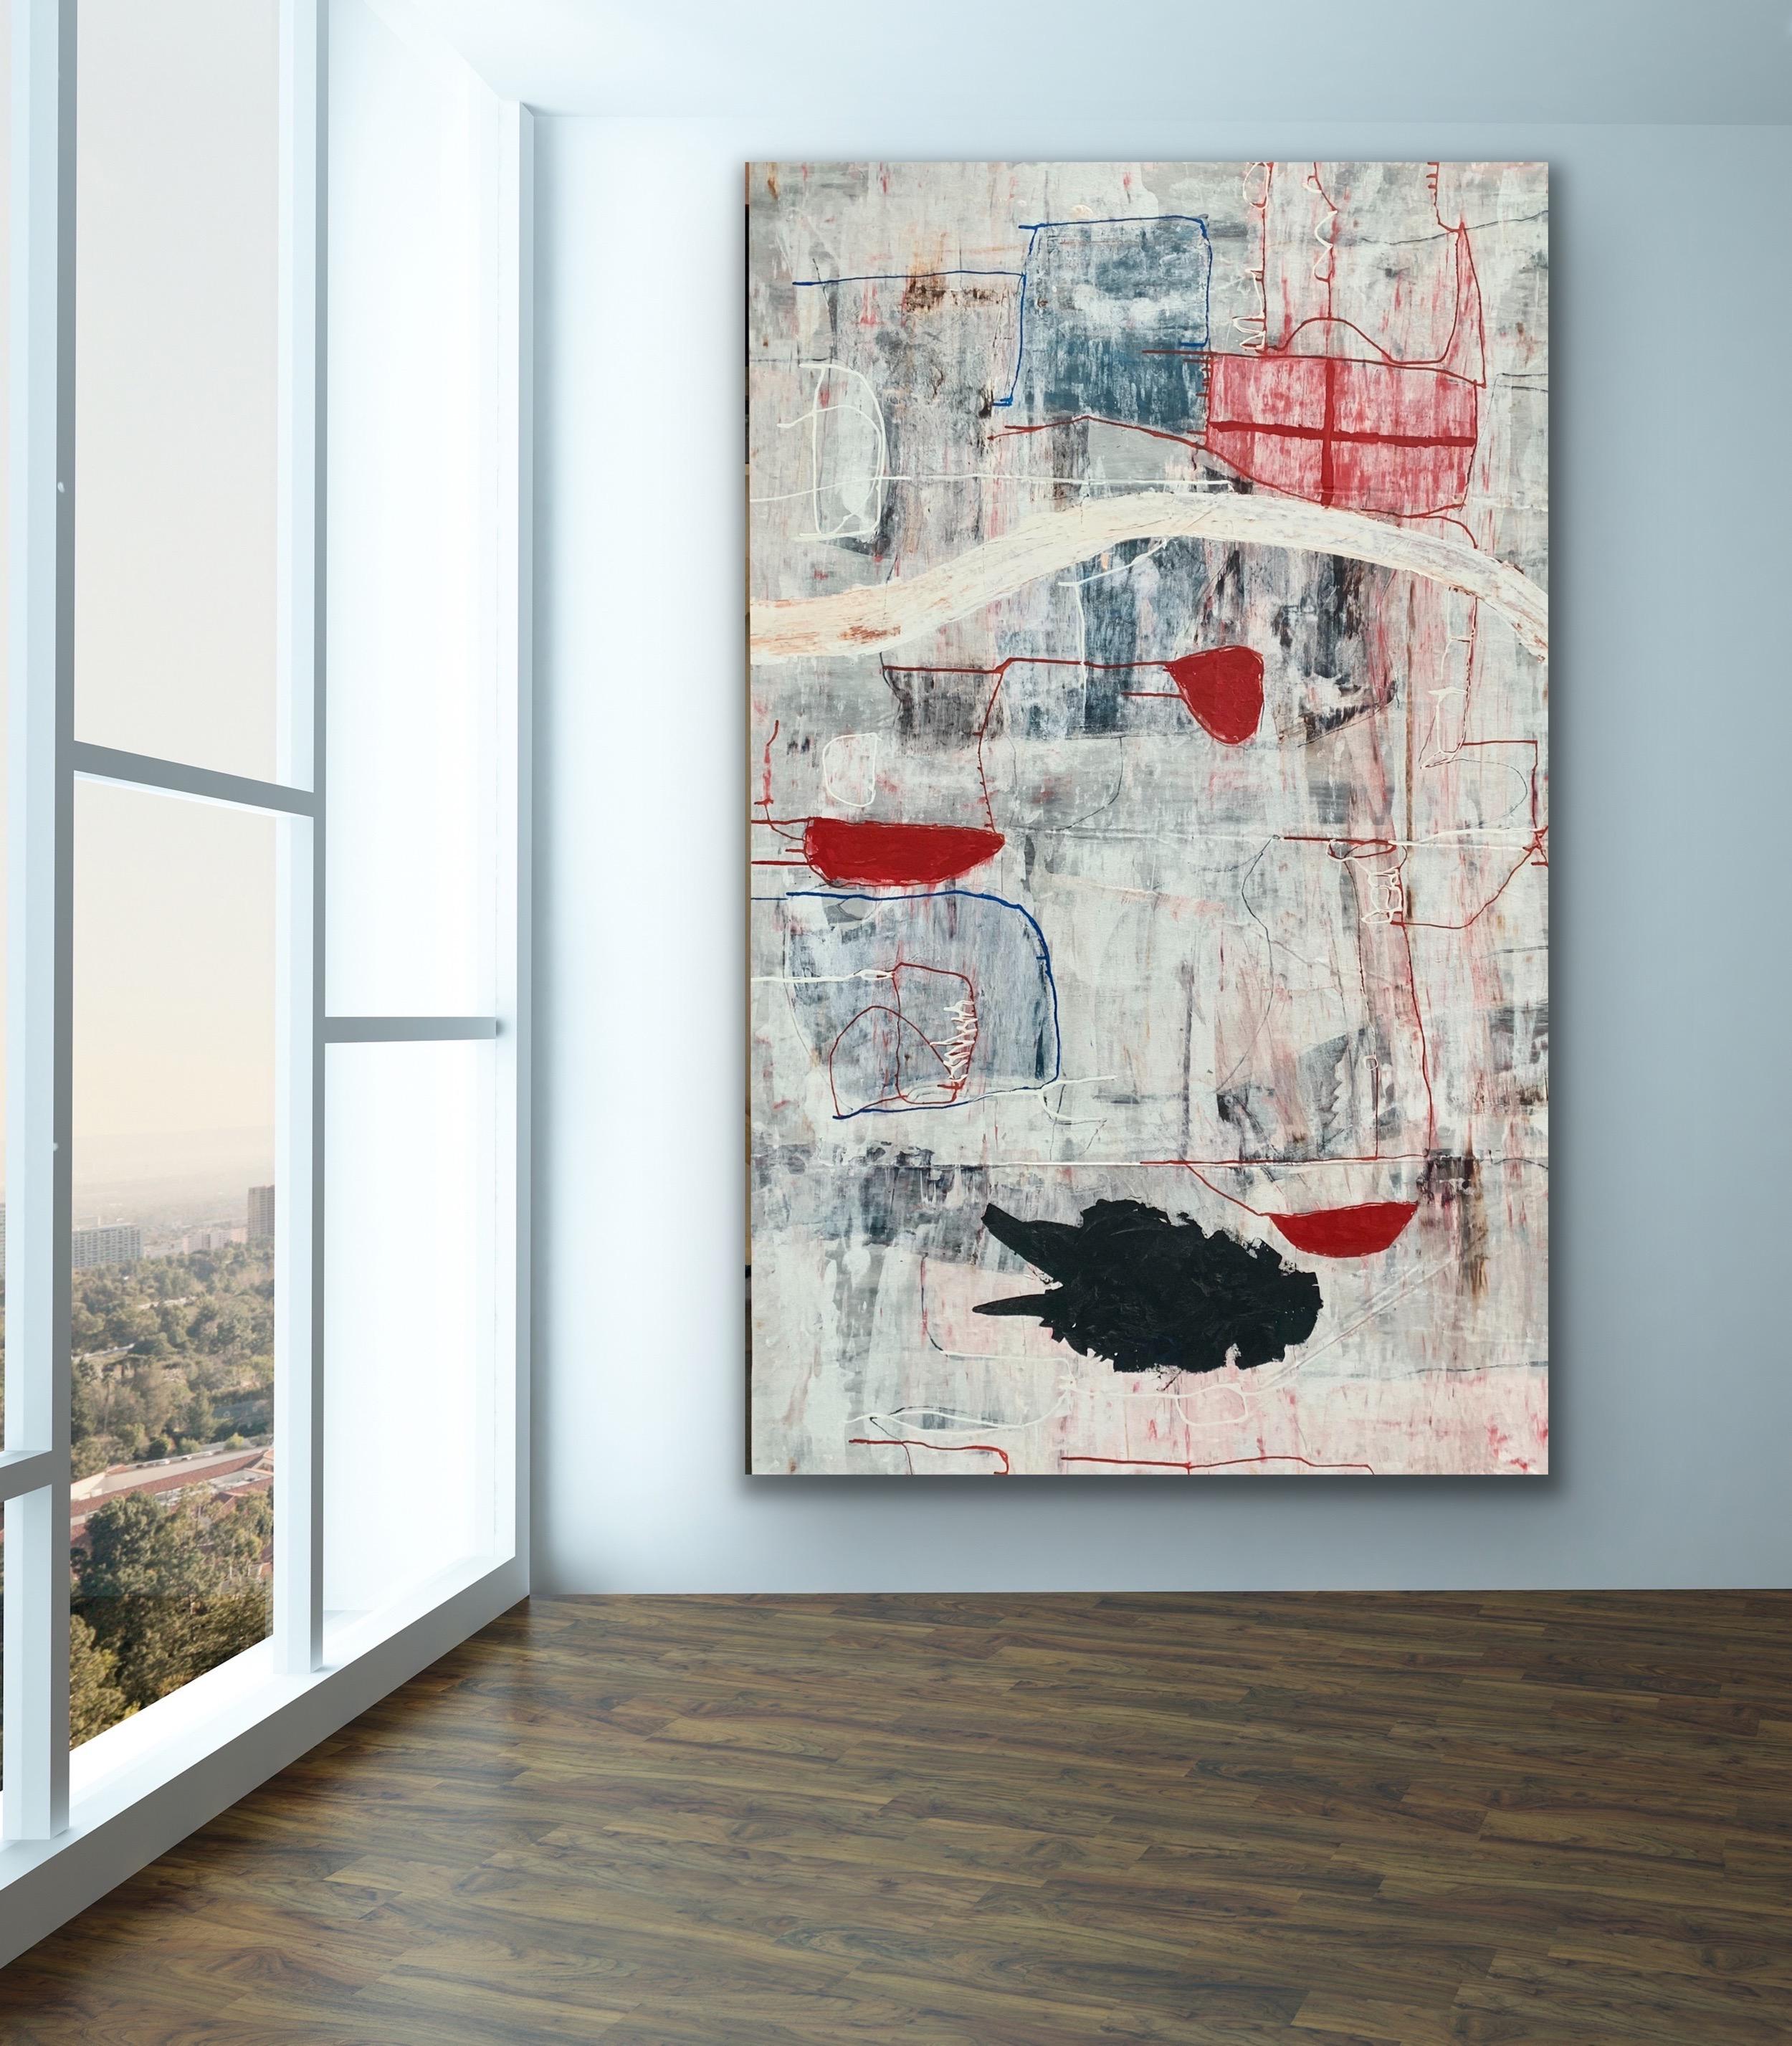 MOONLIGHT - large black, white and red abstract expressionist painting  - Painting by Silvia Poloto